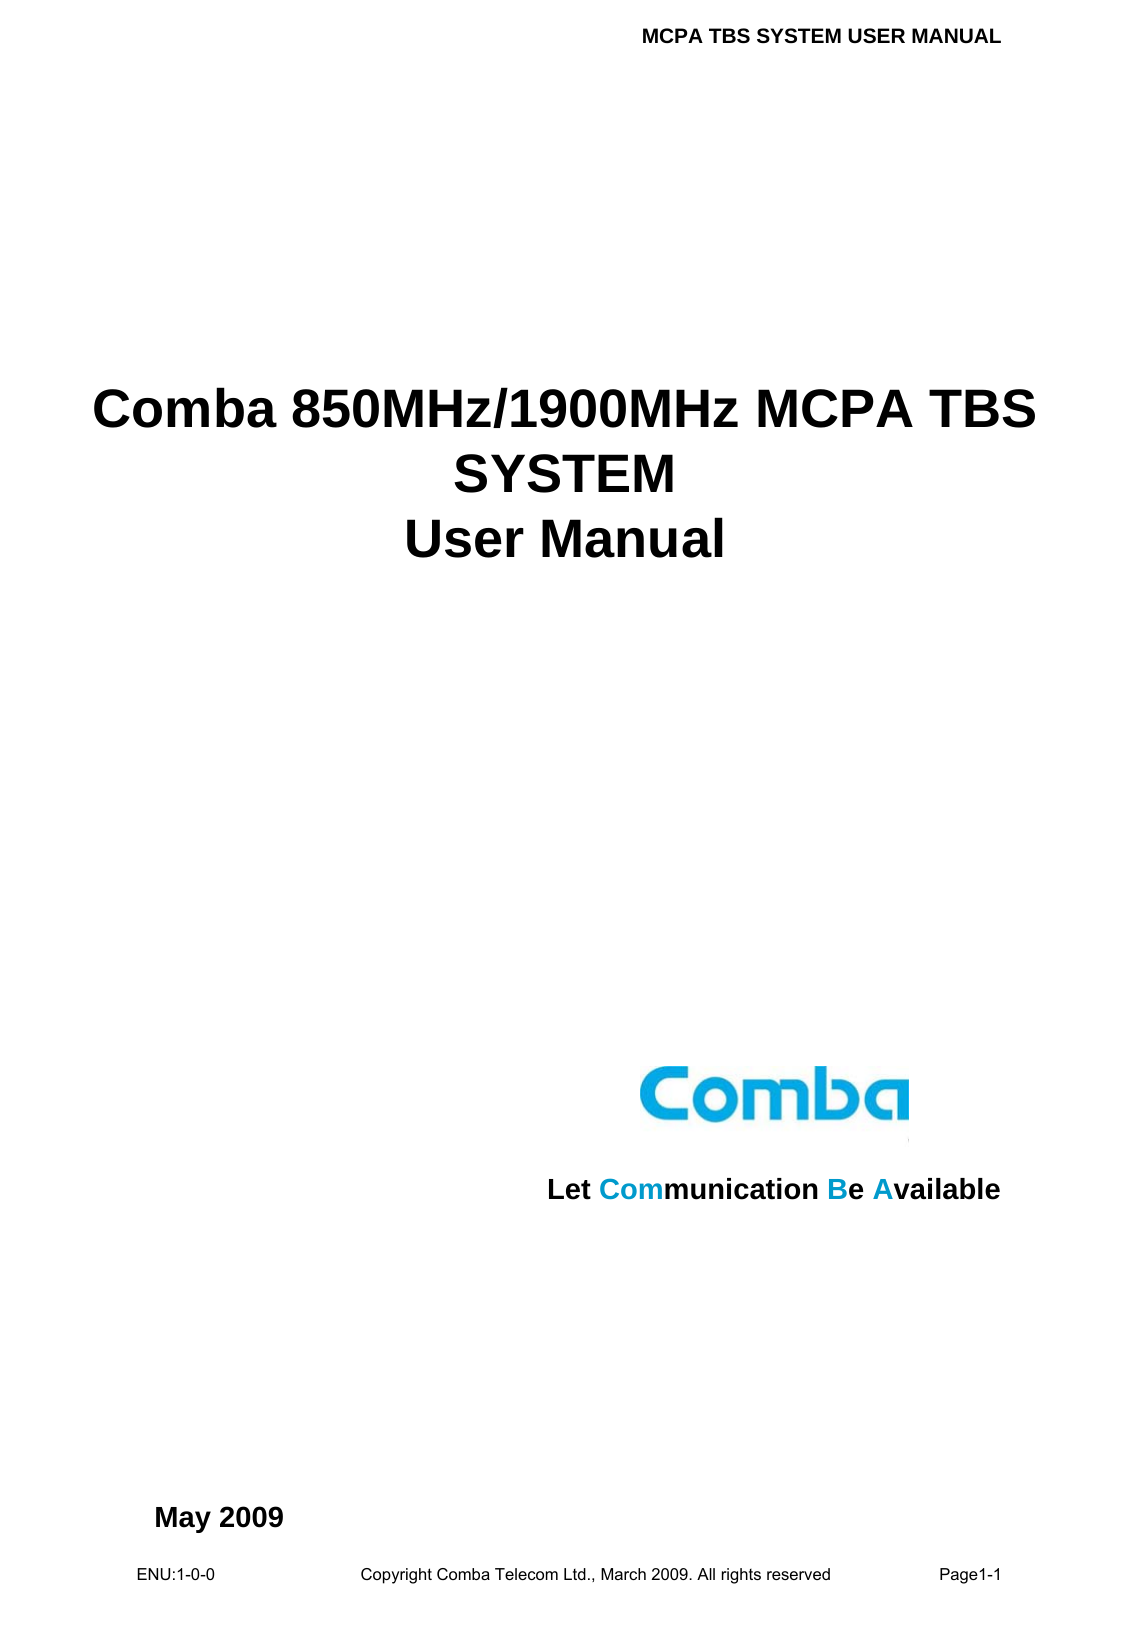 MCPA TBS SYSTEM USER MANUAL ENU:1-0-0 Copyright Comba Telecom Ltd., March 2009. All rights reserved  Page1-1           Comba 850MHz/1900MHz MCPA TBS SYSTEM User Manual May 2009  Let Communication Be Available 